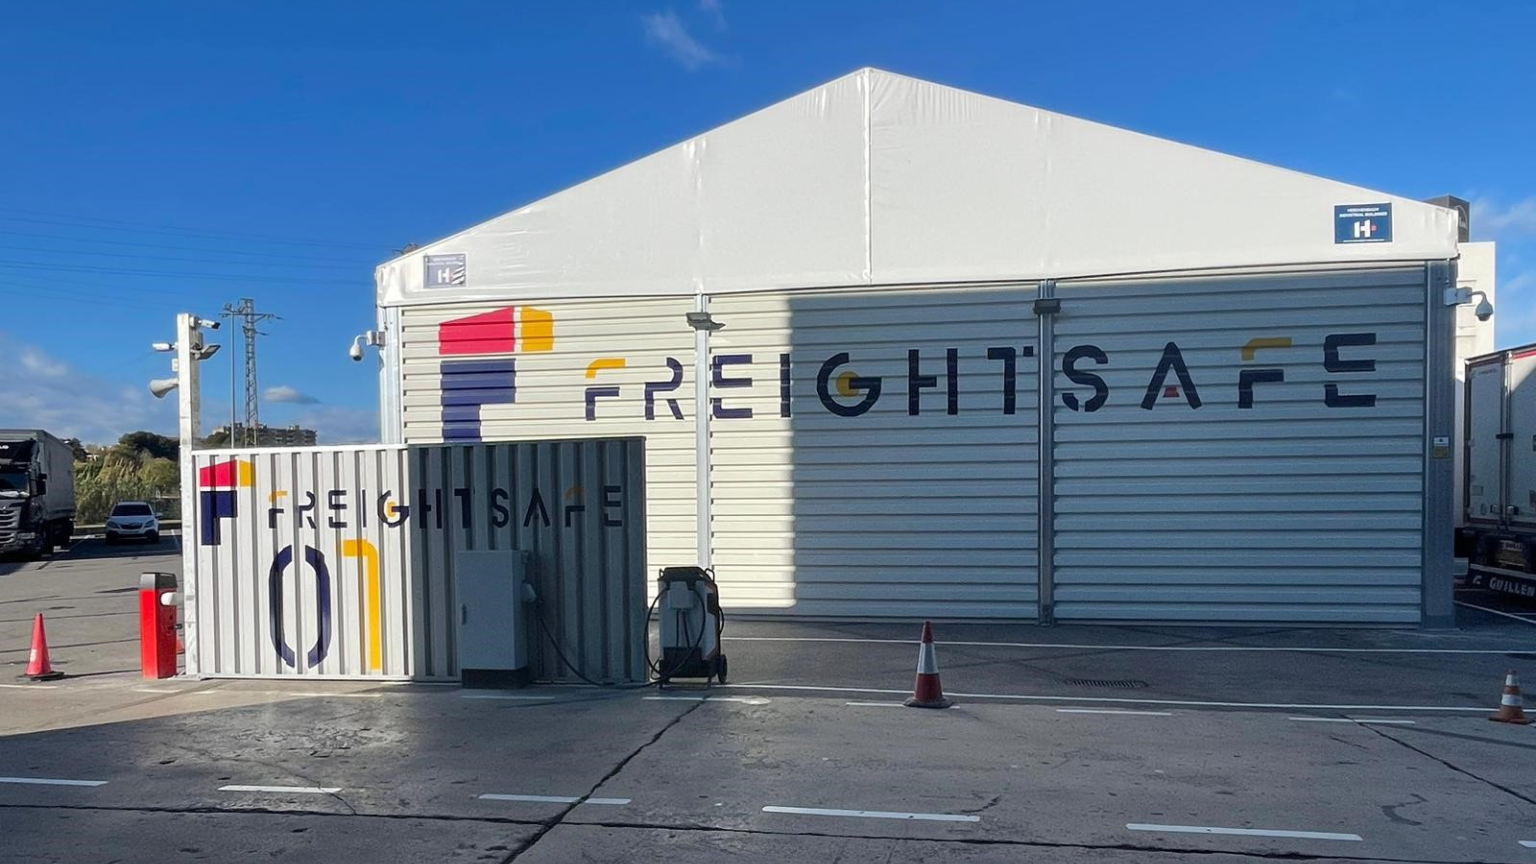 The trucking industry is facing a chronic shortage of drivers. We asked Freightsafe’s Head of Business Development, Sholto Millar, what can be done to improve the working conditions of long-haul truck drivers.